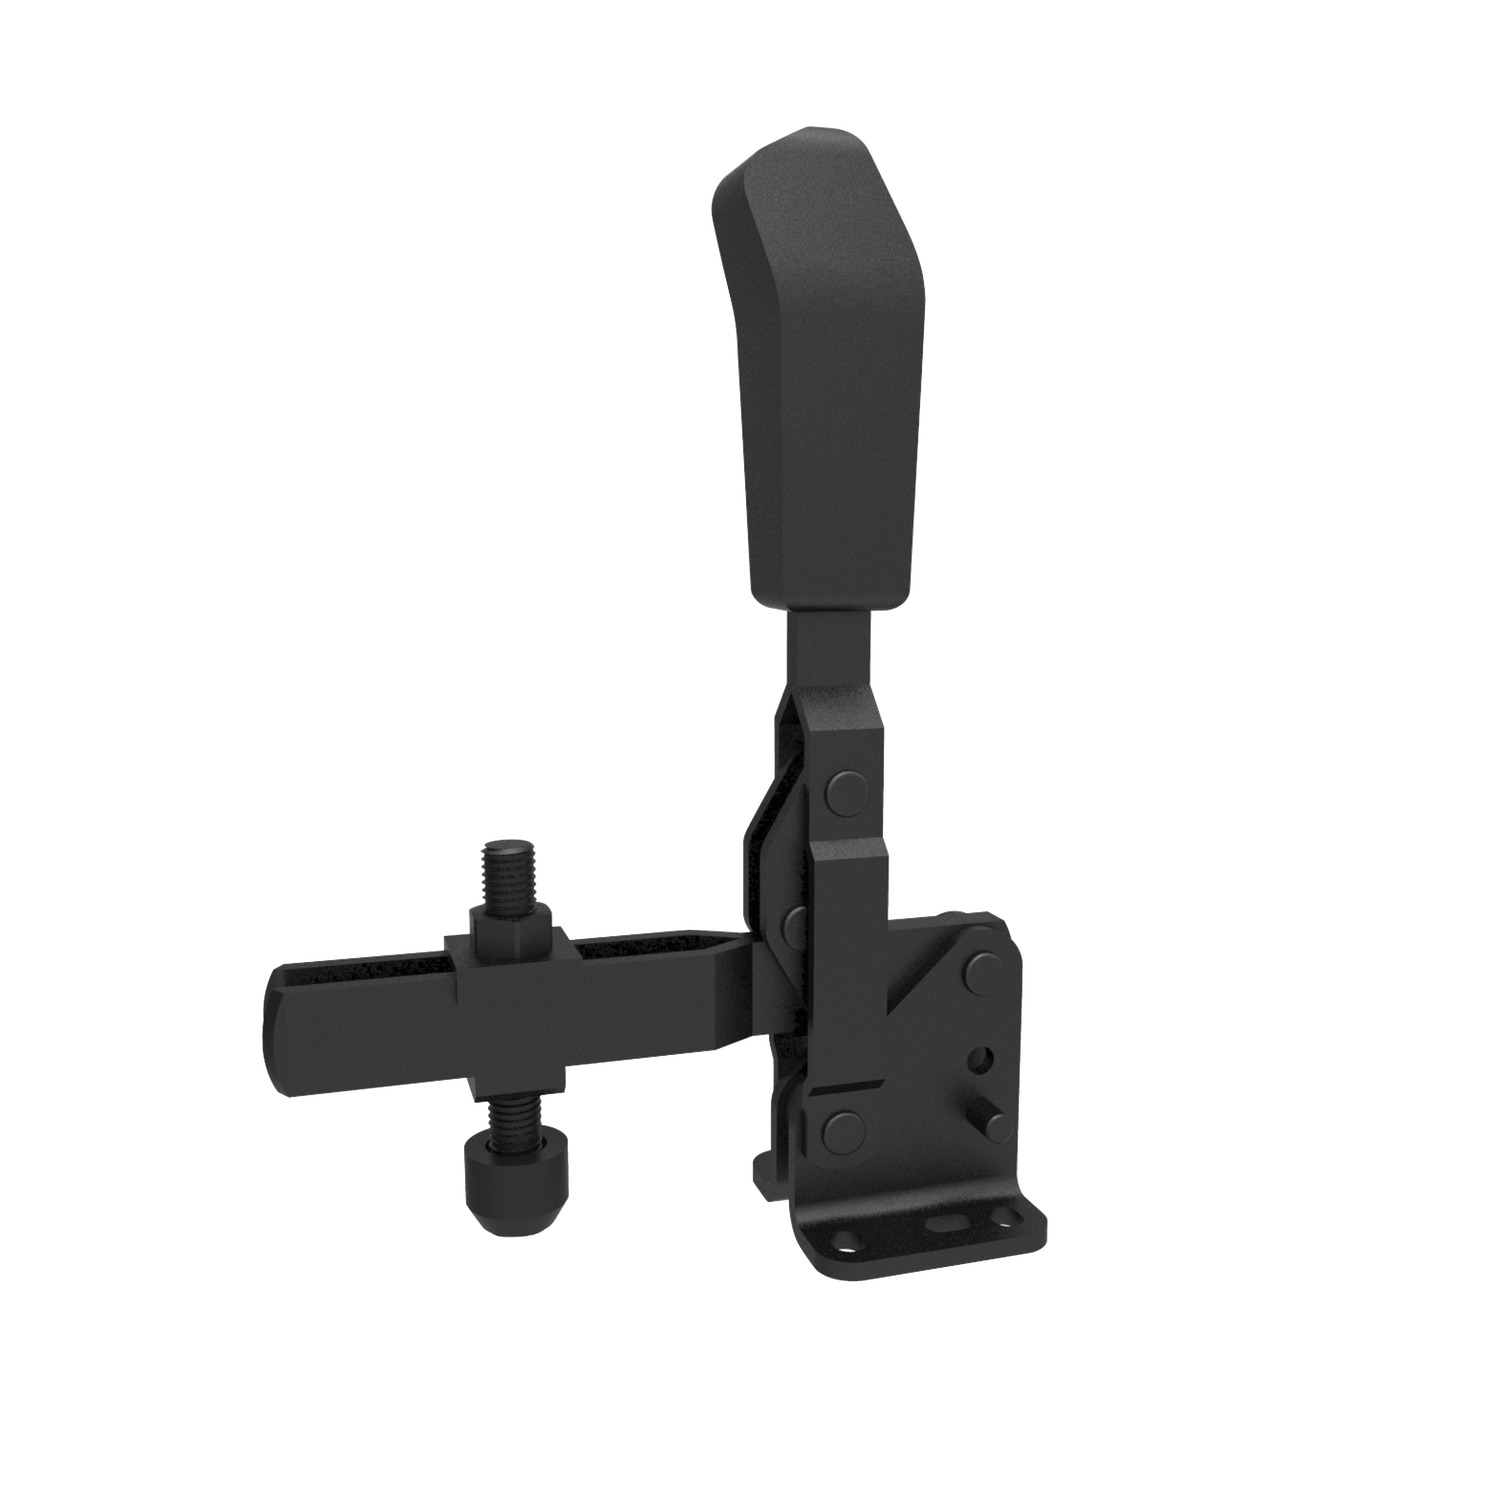 Product 40000.2, Vertical Acting Toggle Clamps black - open arm - horizontal base / 